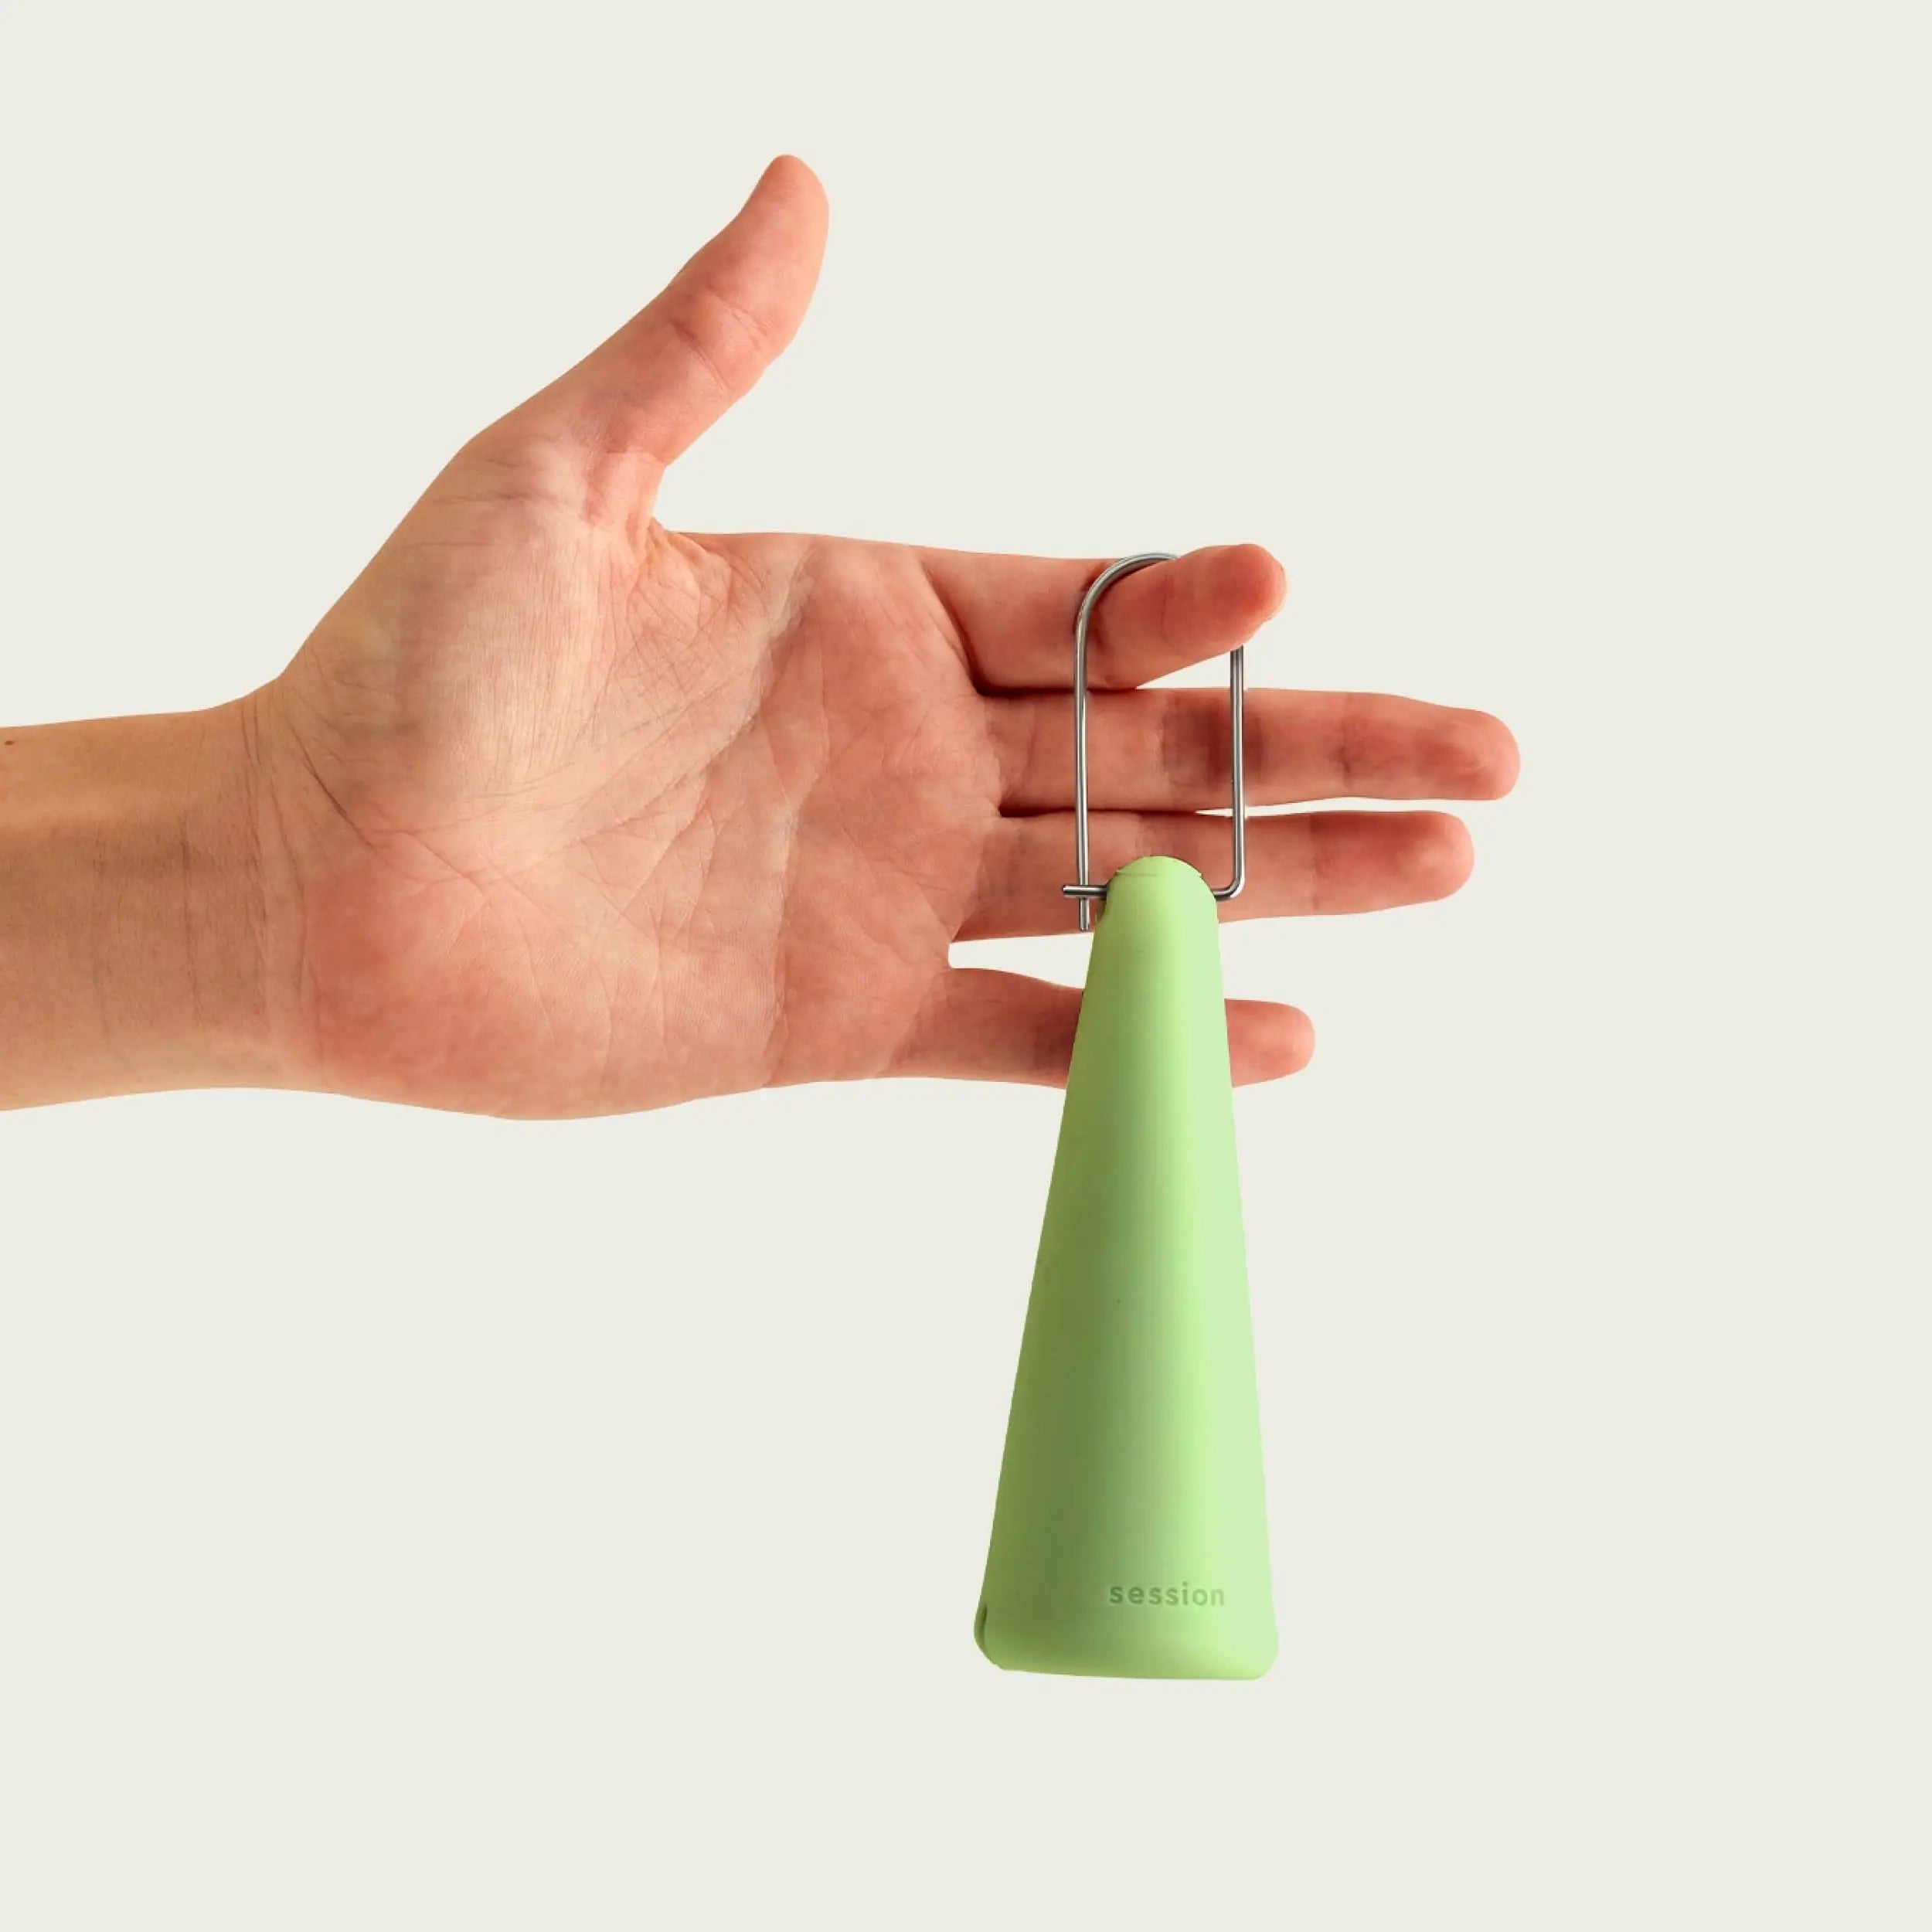 Enhance Your Session with Session Goods Silicone Sleeve in Celery Green.